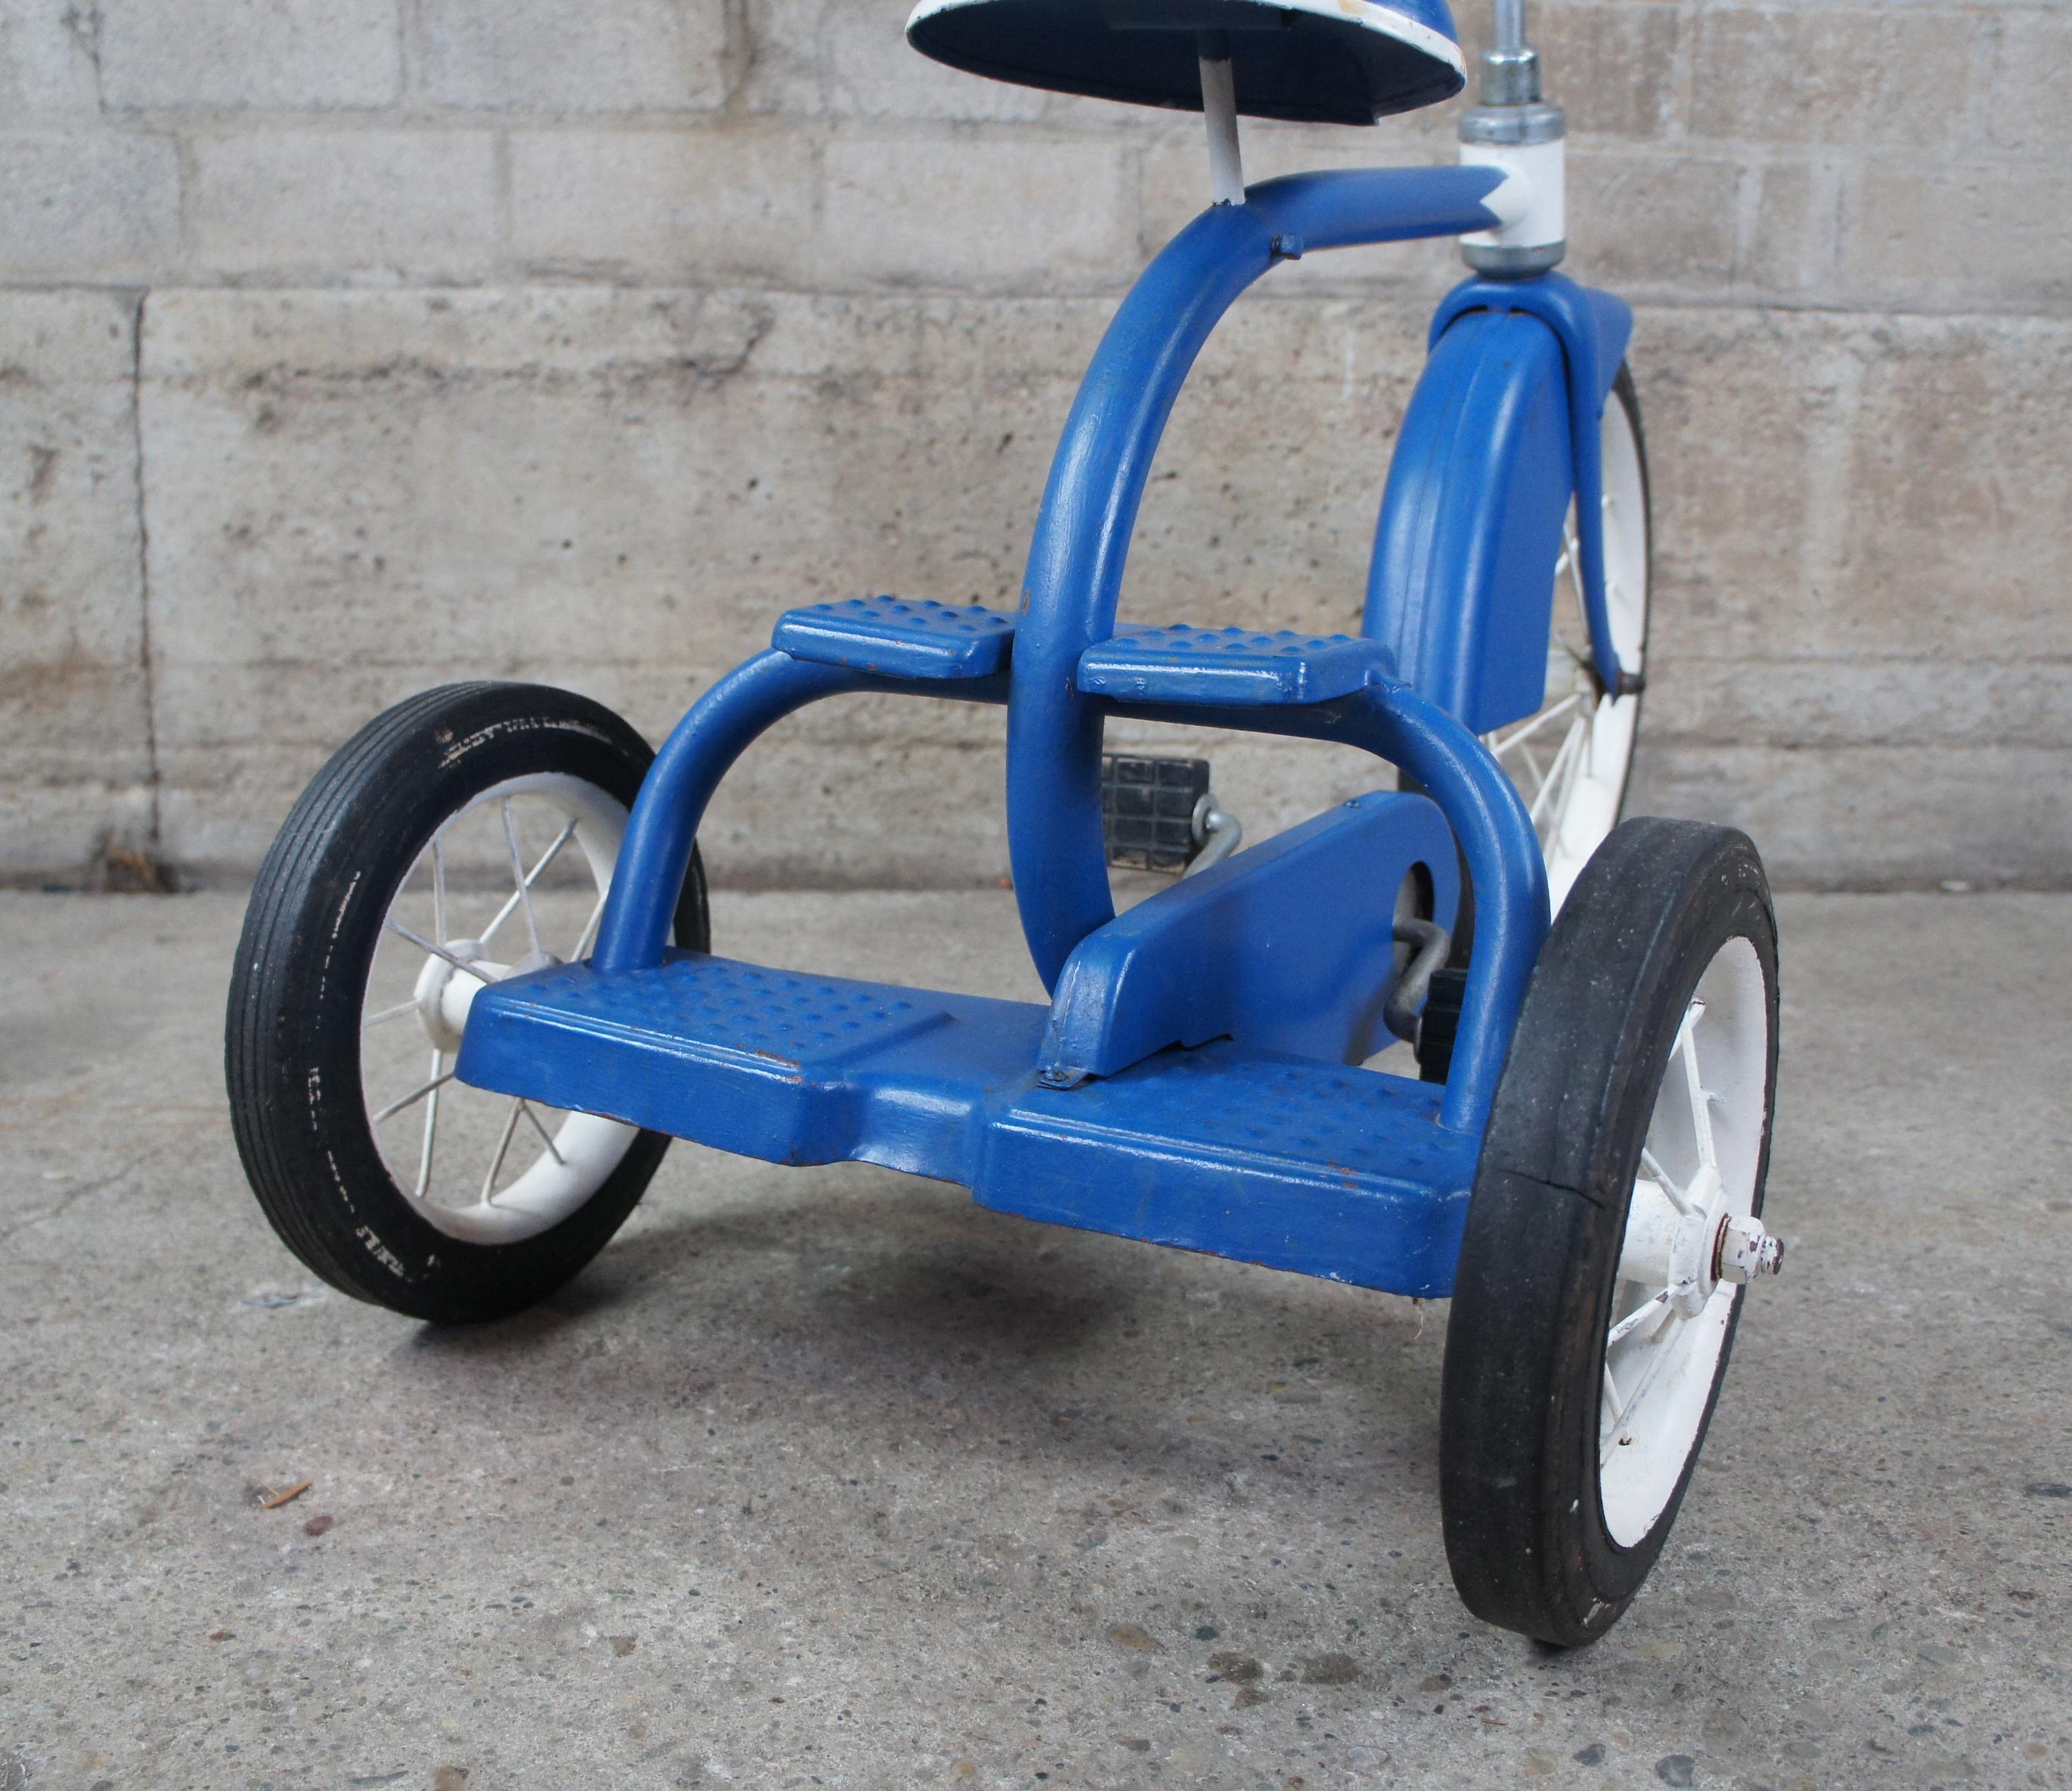 Mid-20th Century 1960s Vintage Western Flyer Blue & White Childs Tricycle Pedal Bike Atomic